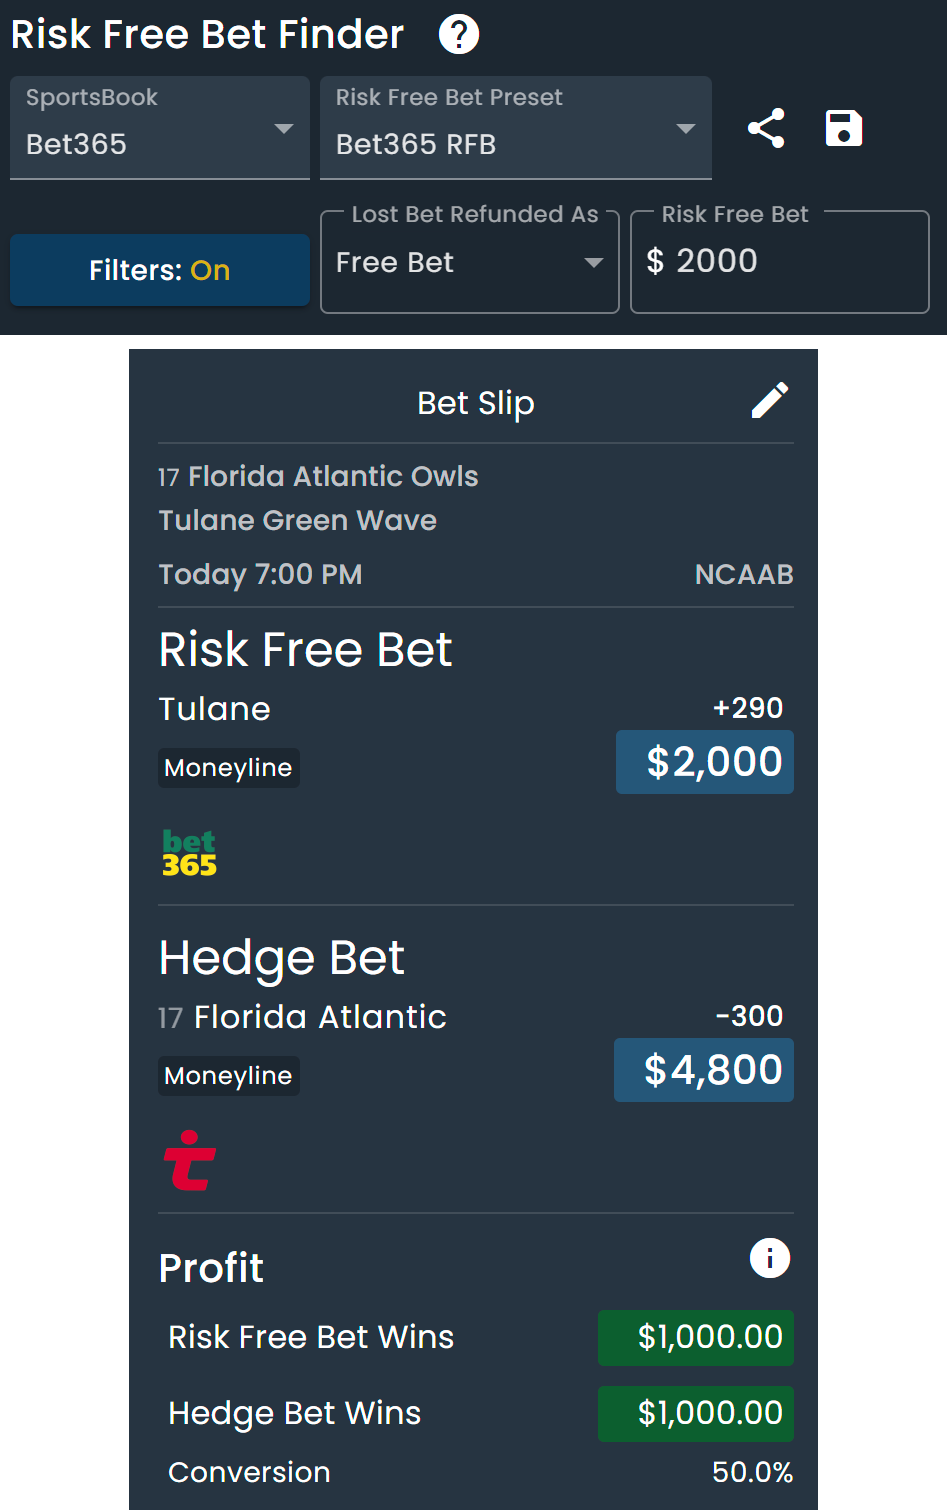 Screenshot of the DarkHorse Odds Bet Finder Settings for the Bet365 $2,000 Second Chance Bet